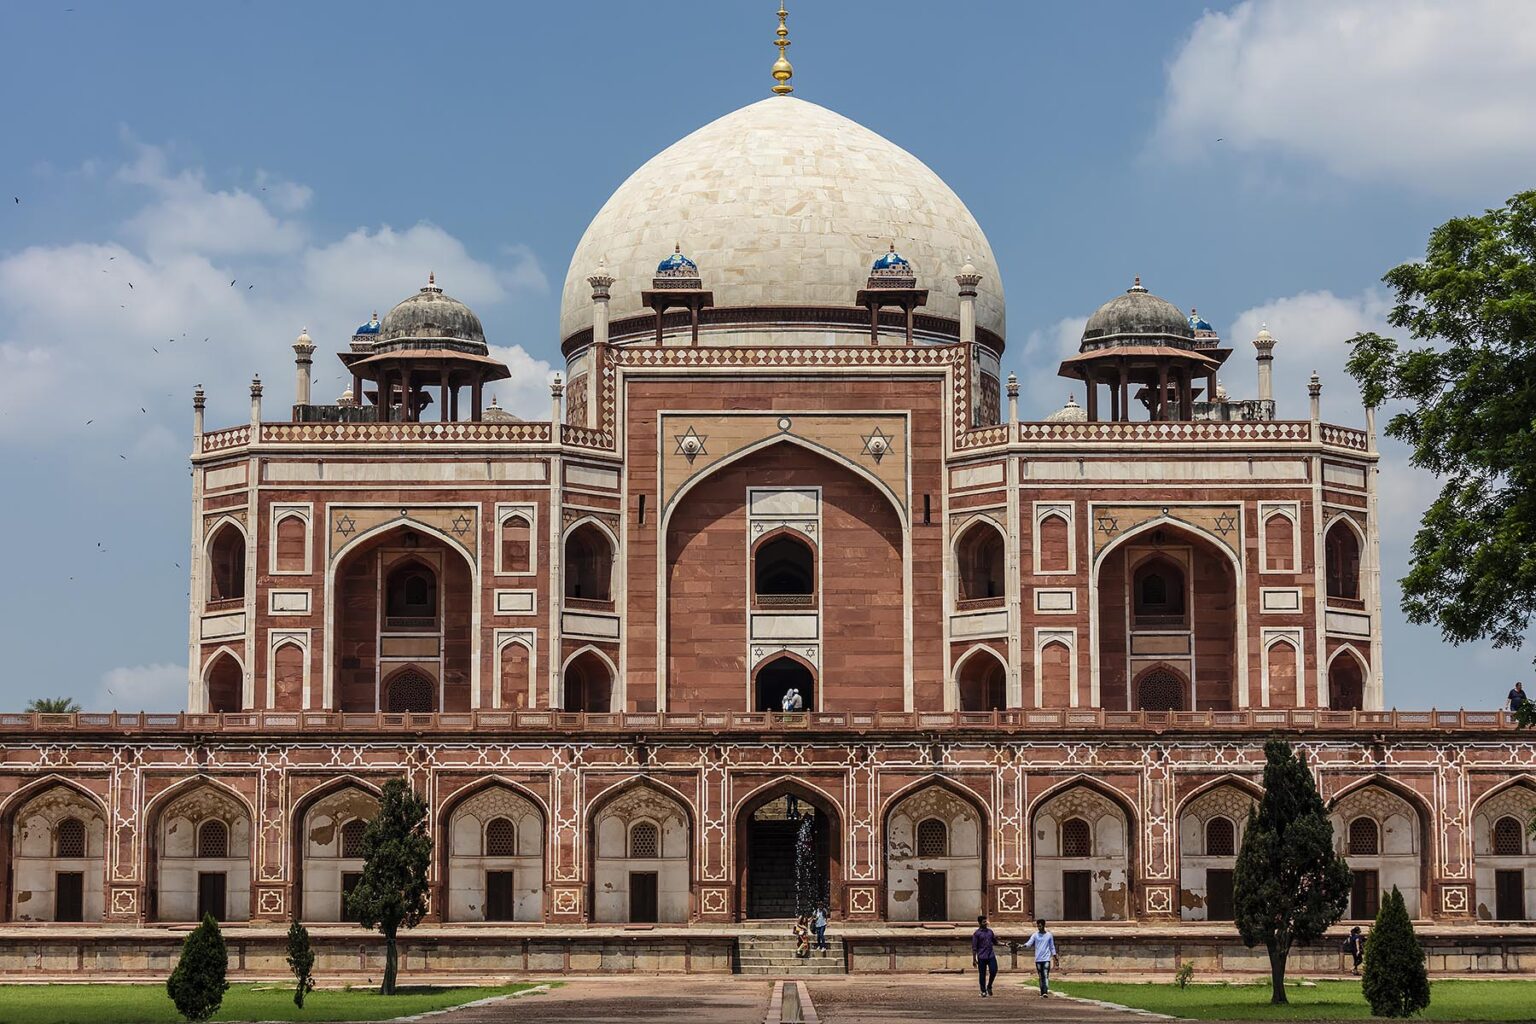 The UNESCO World Heritage Site HUMAYUN'S TOMB was built during Mughal times in the 16th century  - NEW DELHI, INDIA